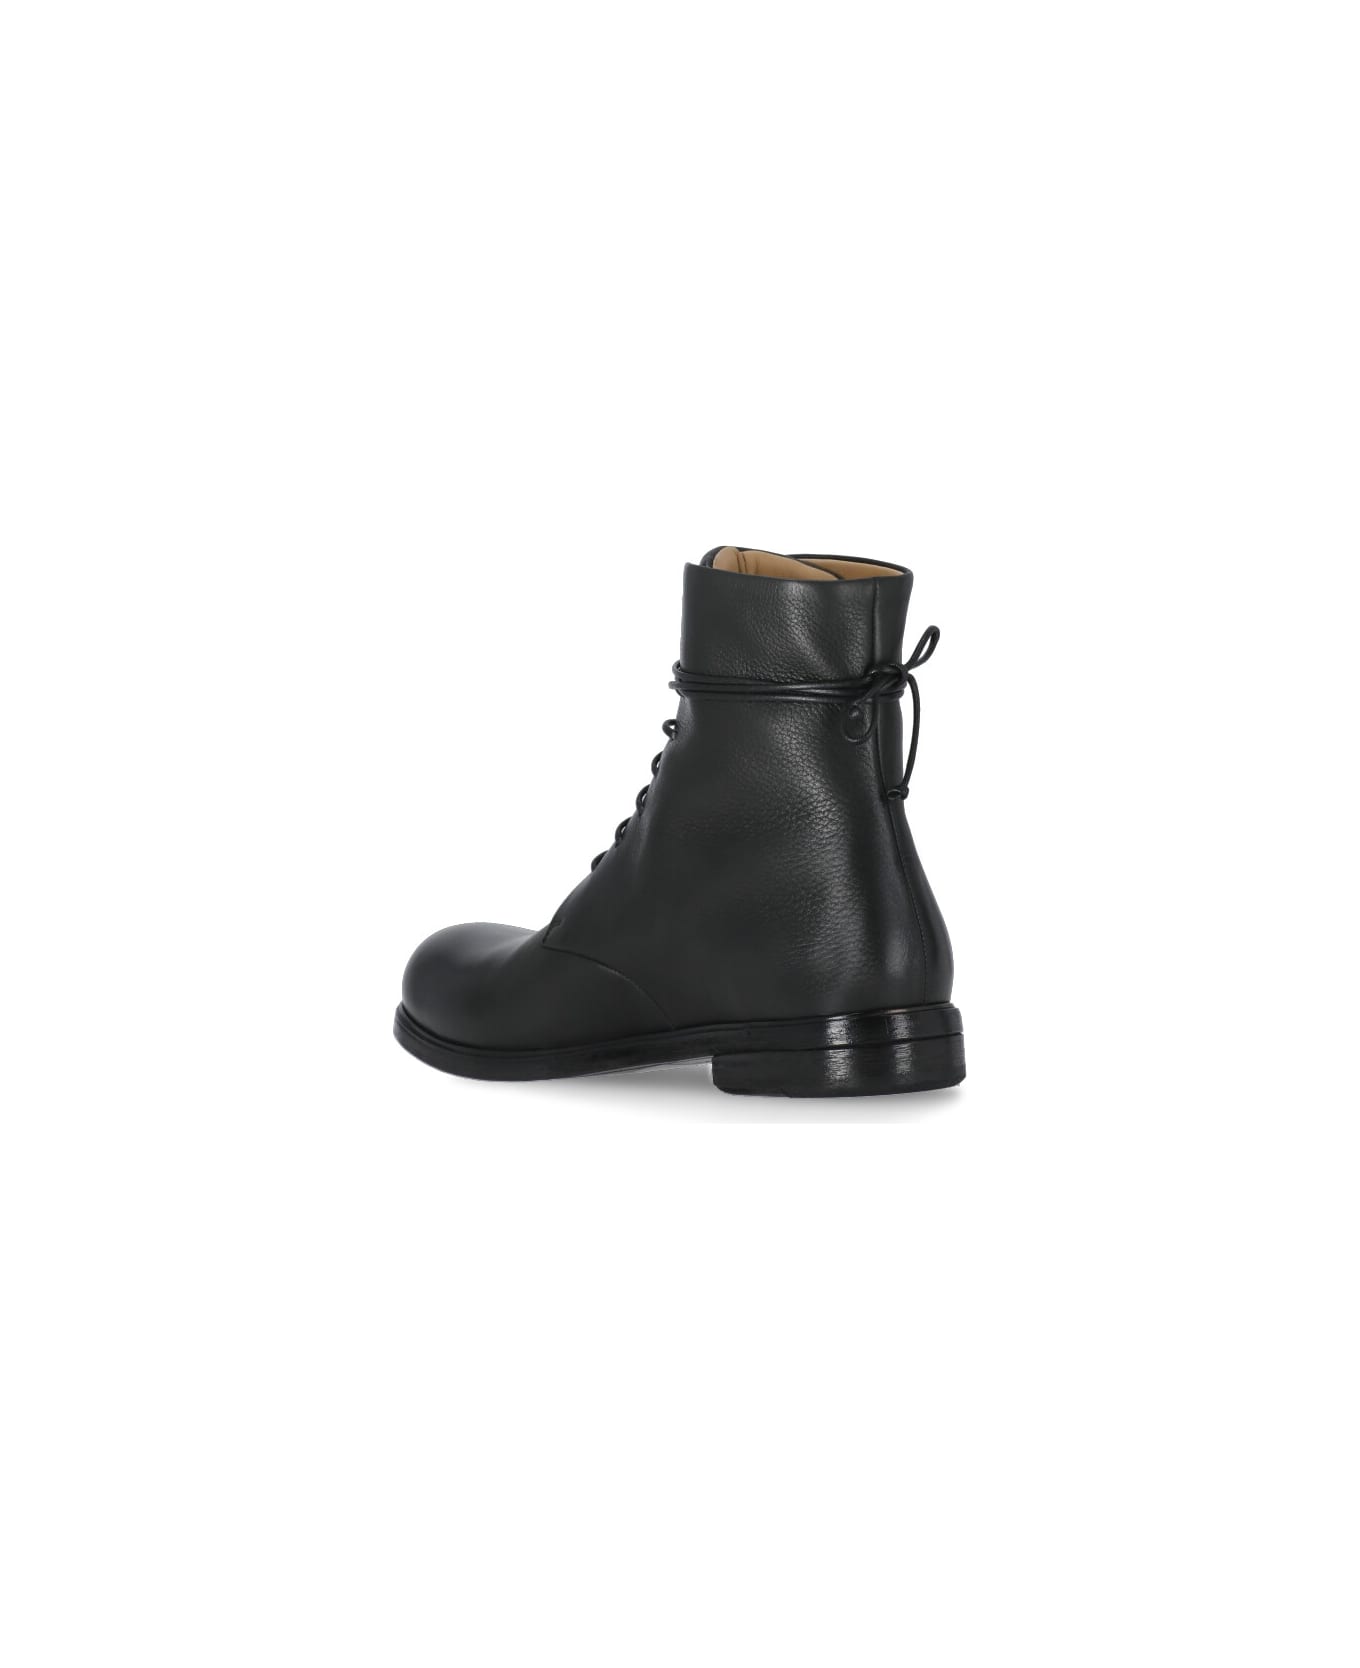 Marsell Zucca Ankle Boots - Black